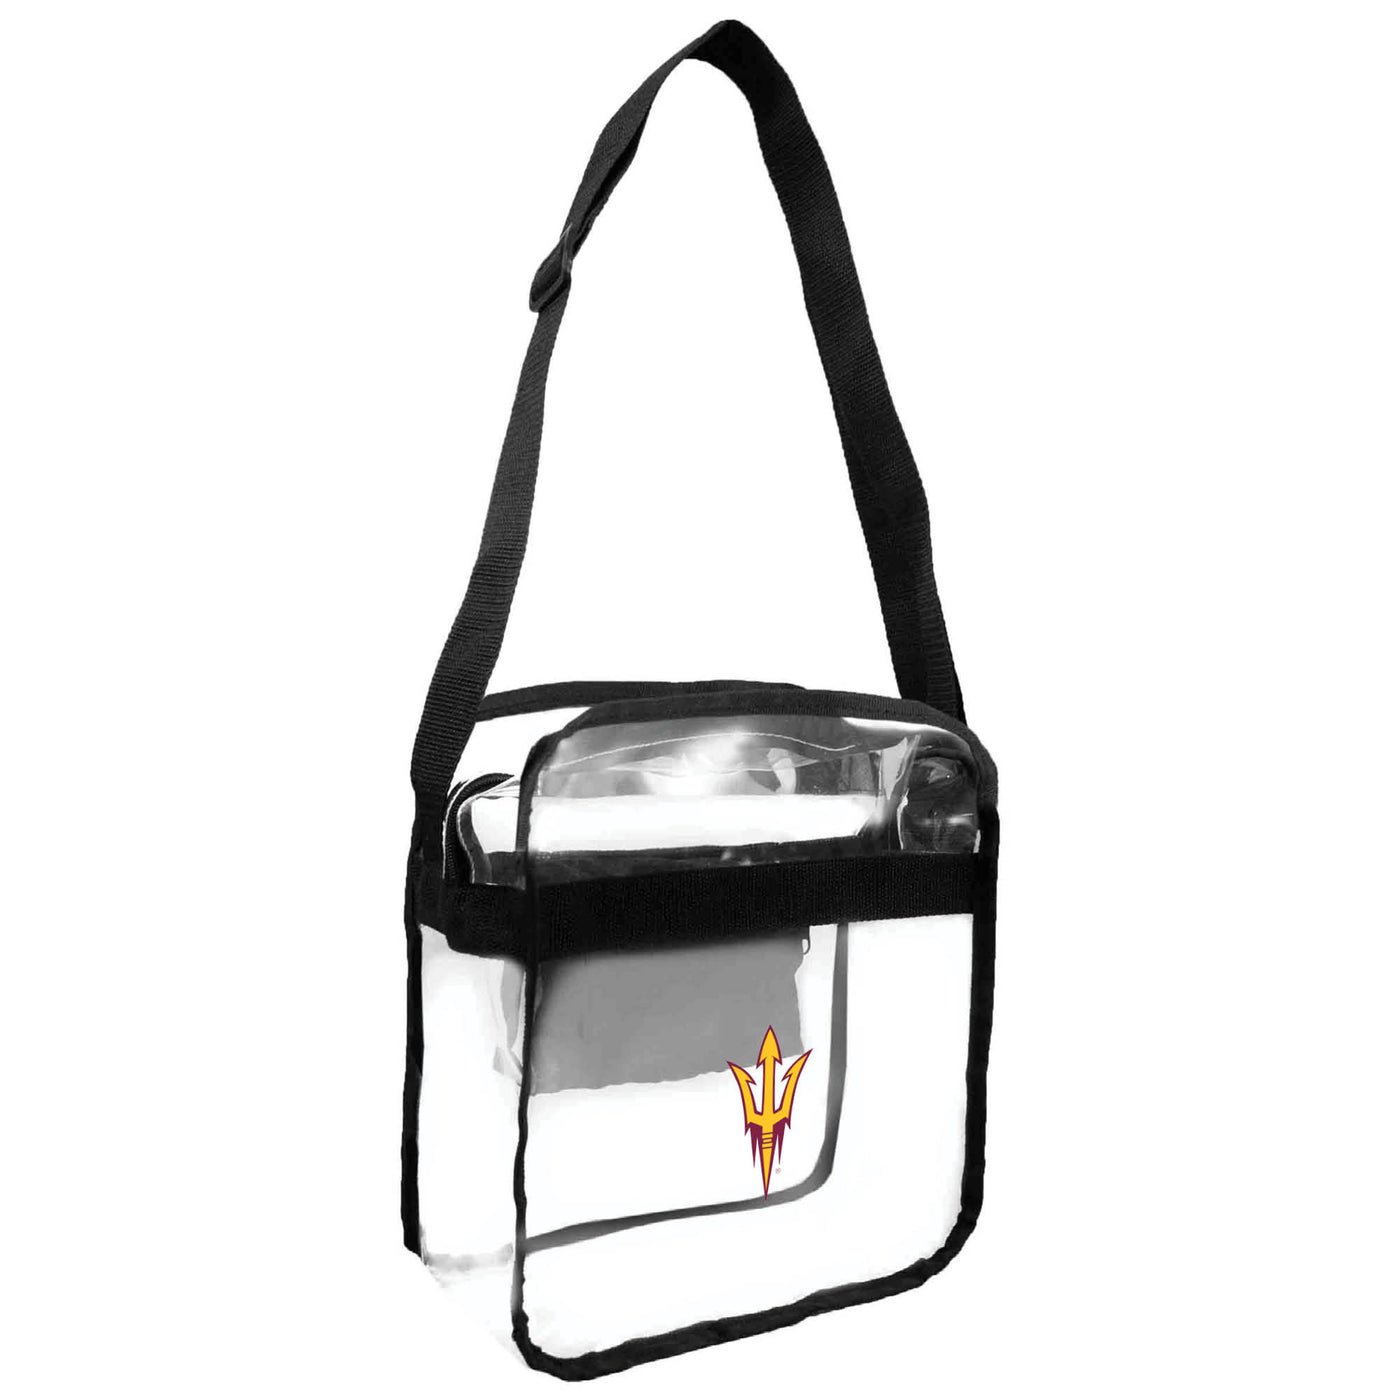 ASU Clear square shaped zip up bag with rounded edges. Trimmed in black with a black strap. On the bag is a gold pitchfork logo outlined in maroon.